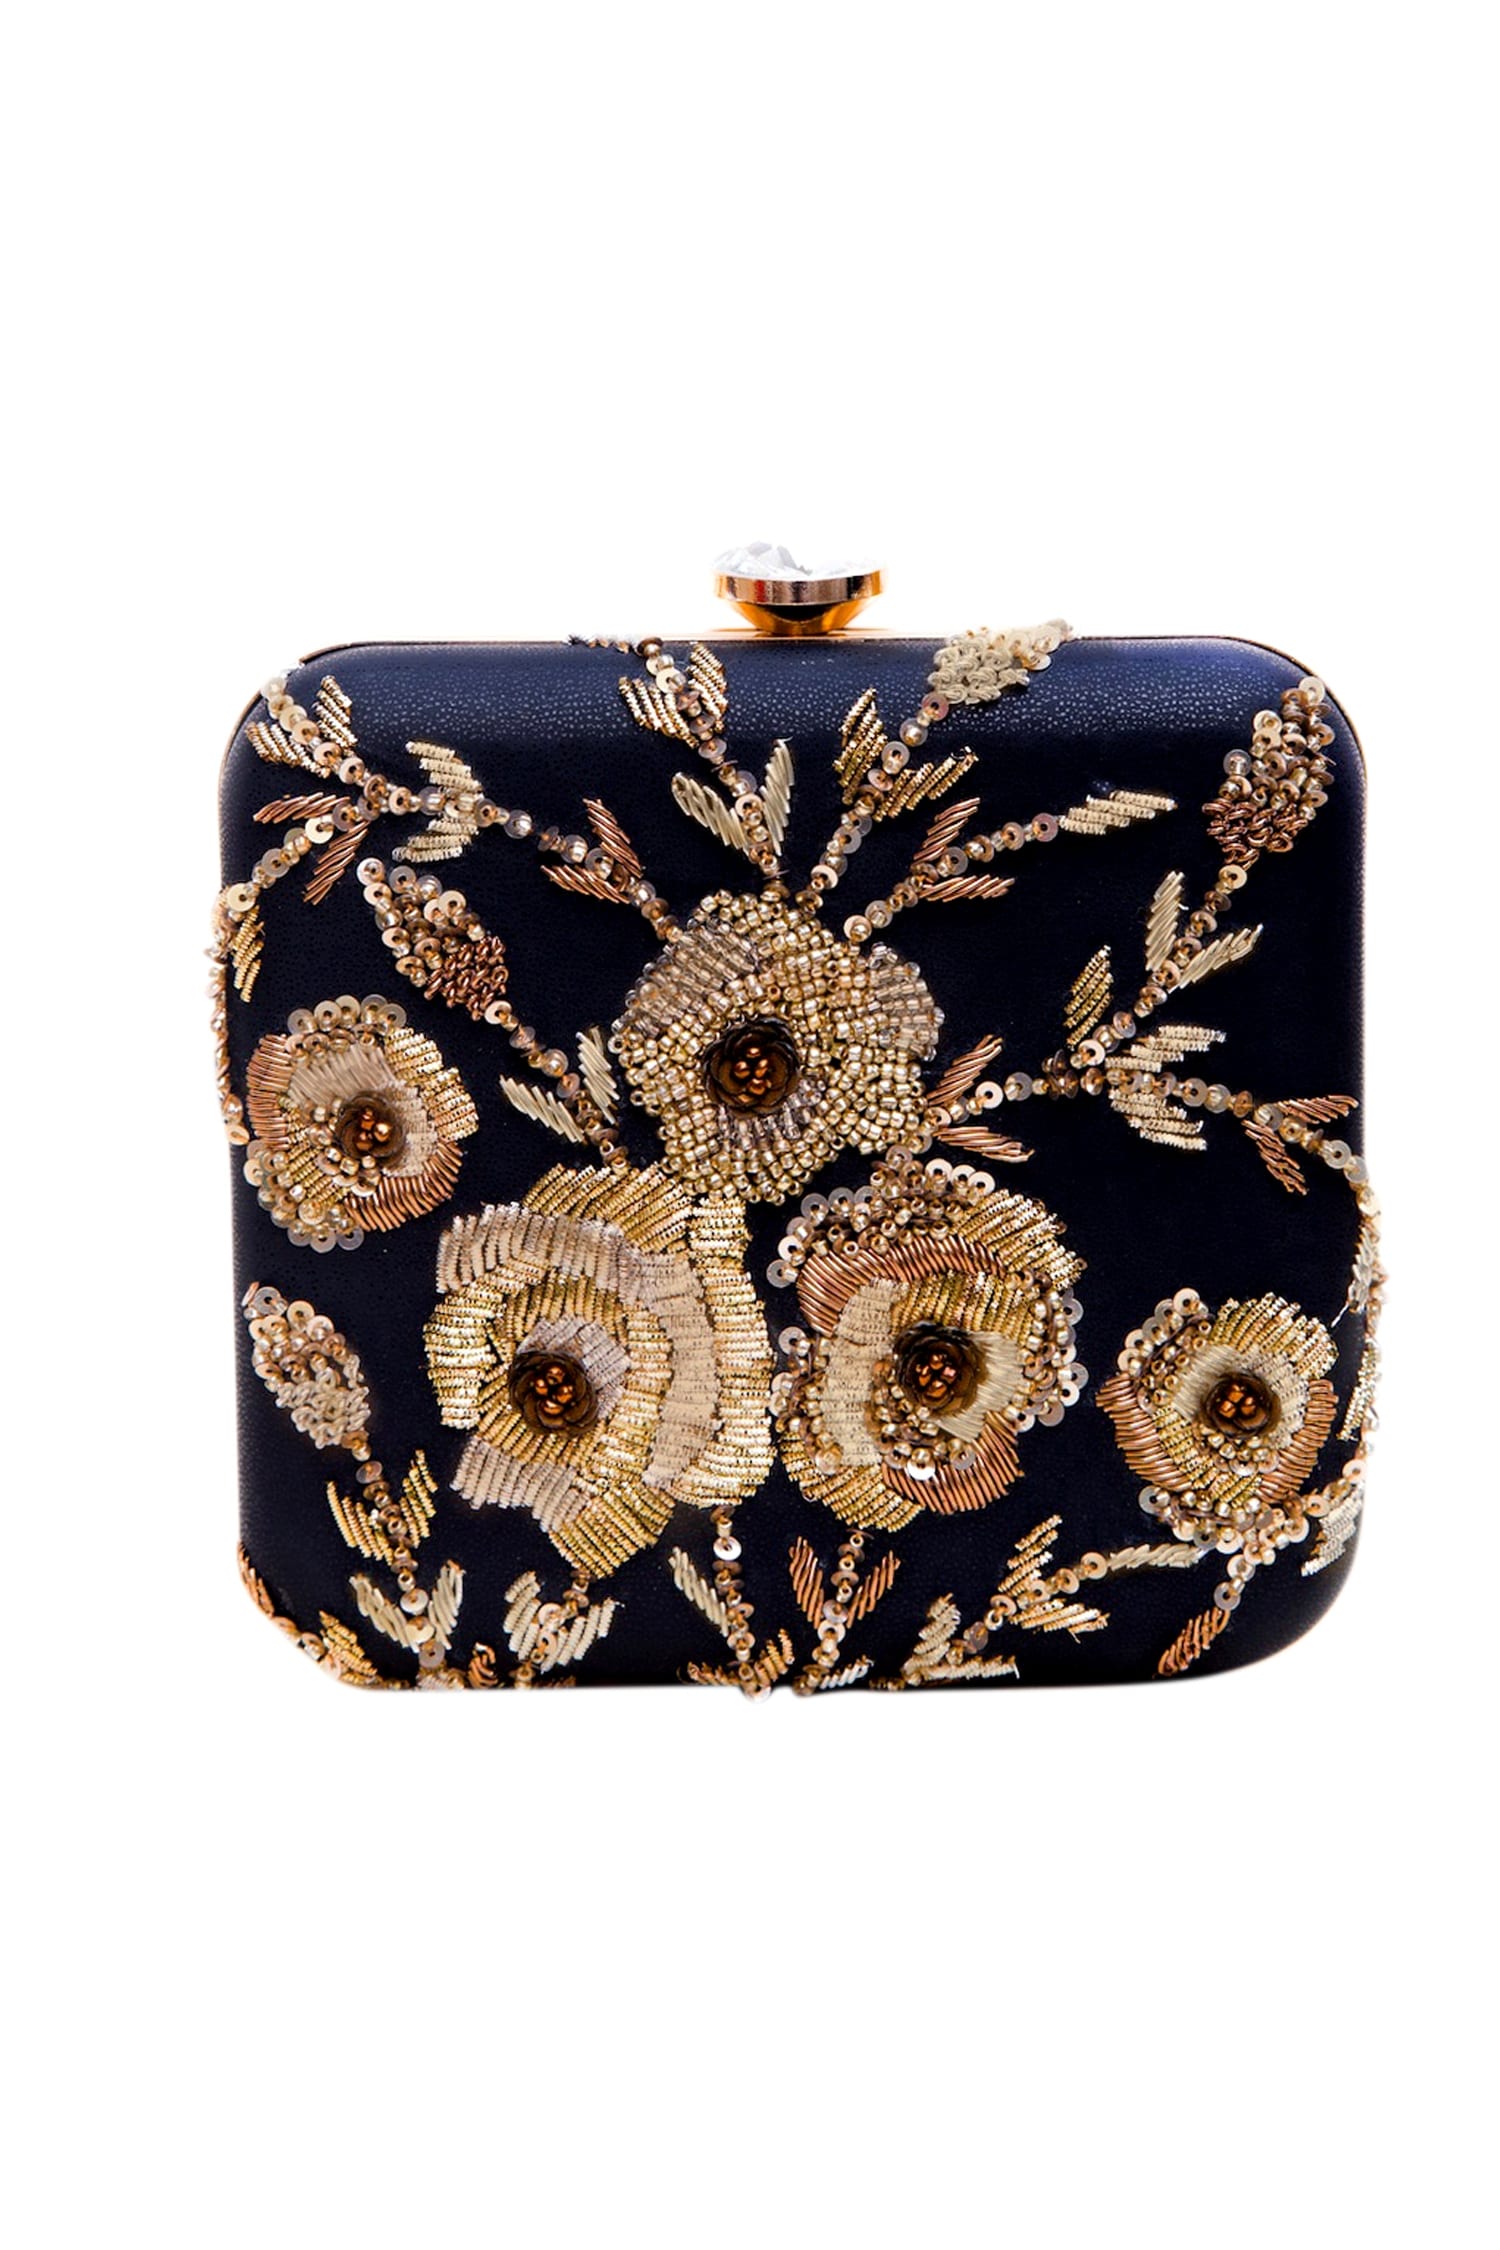 Buy Black clutch with rose embroidery by Adora by Ankita at Aza Fashions